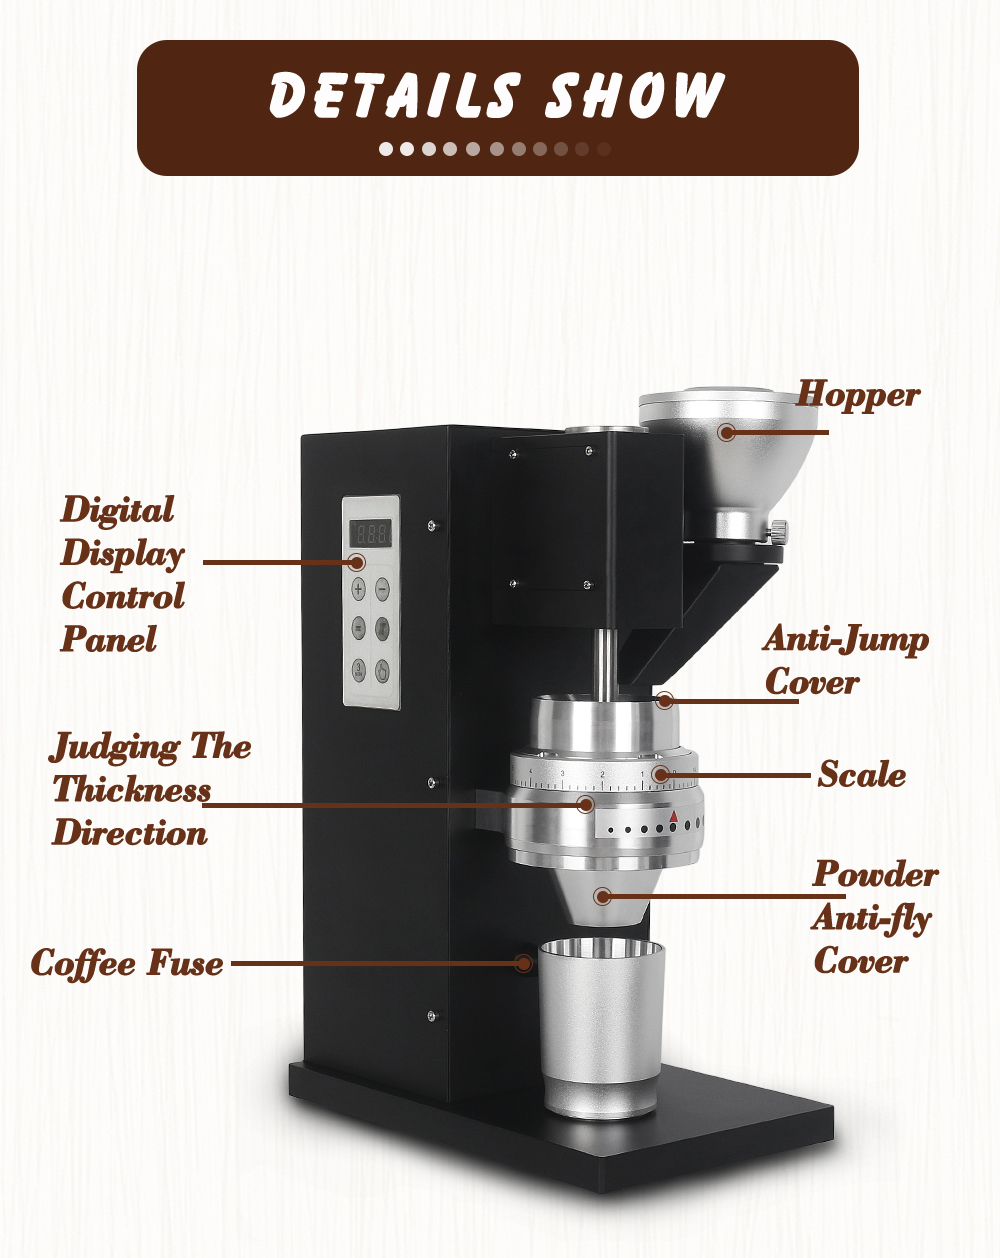 https://img2.tradewheel.com/uploads/images/mce_uploads/automatic-coffee-grinder-230g-hopper-capacity-anti-jumping-bean-adjustable-thickness-cafe-grinding-machine-commercial-home-use2-0095504001603389228.jpg